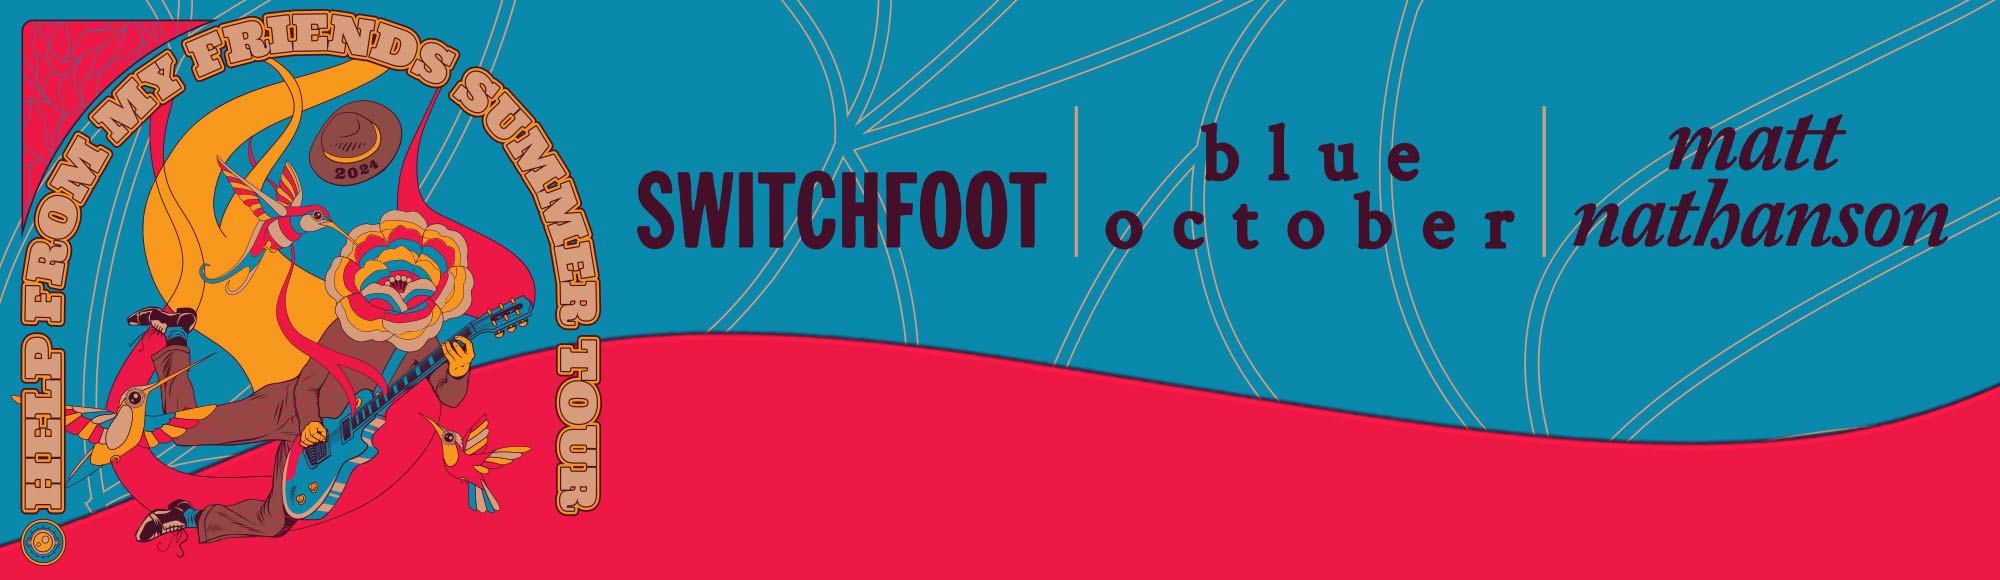 Switchfoot, Blue October, and Matt Nathanson – Help From My Friends Tour show